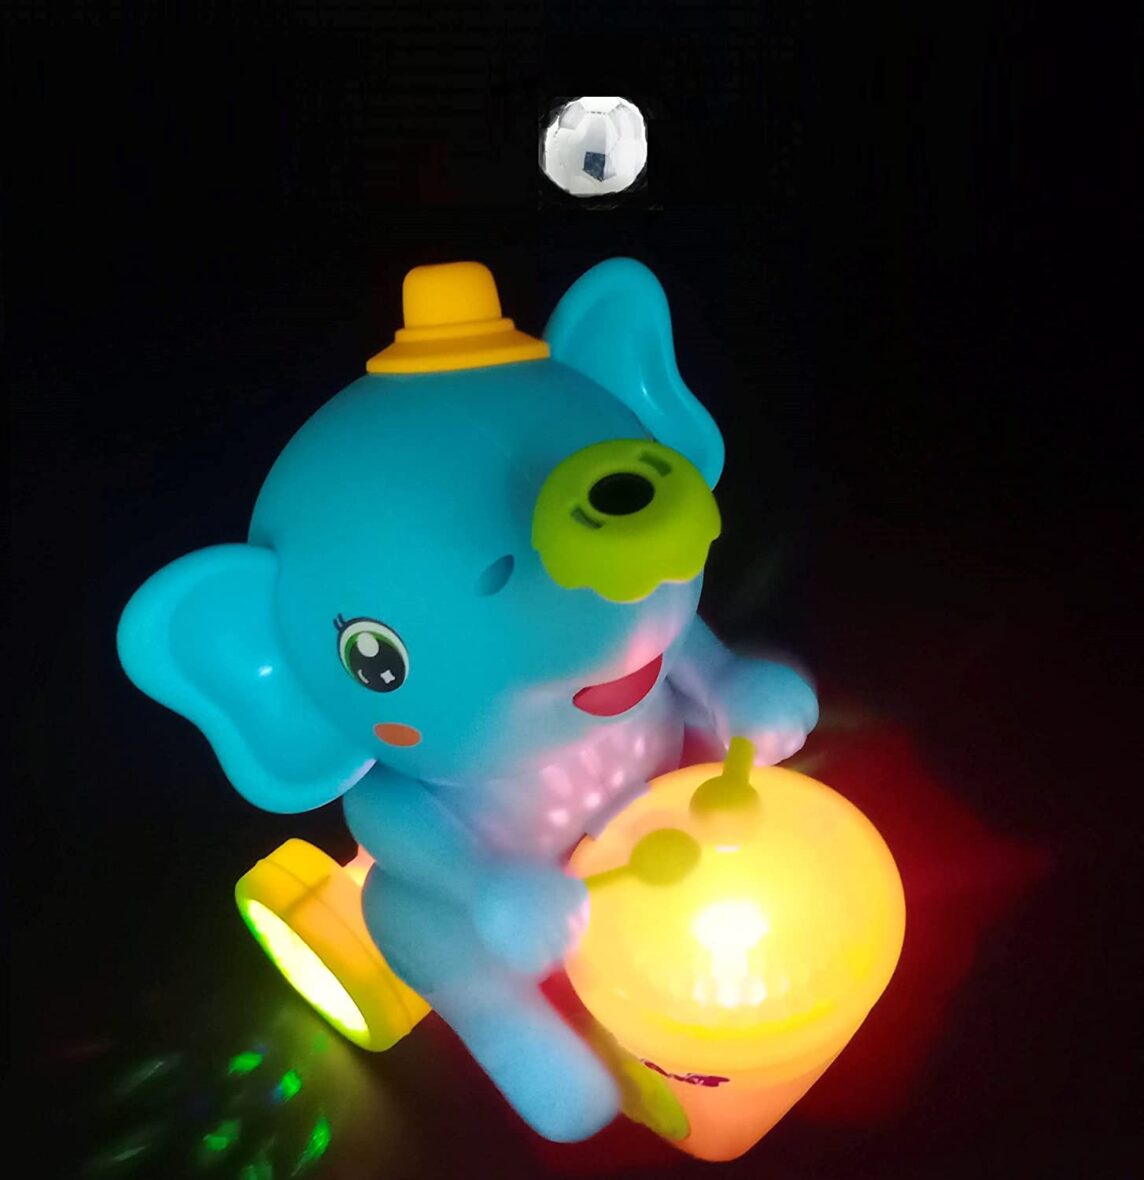 U-smile-Drummer-Elephant-with-dancing-ball-and-light-5